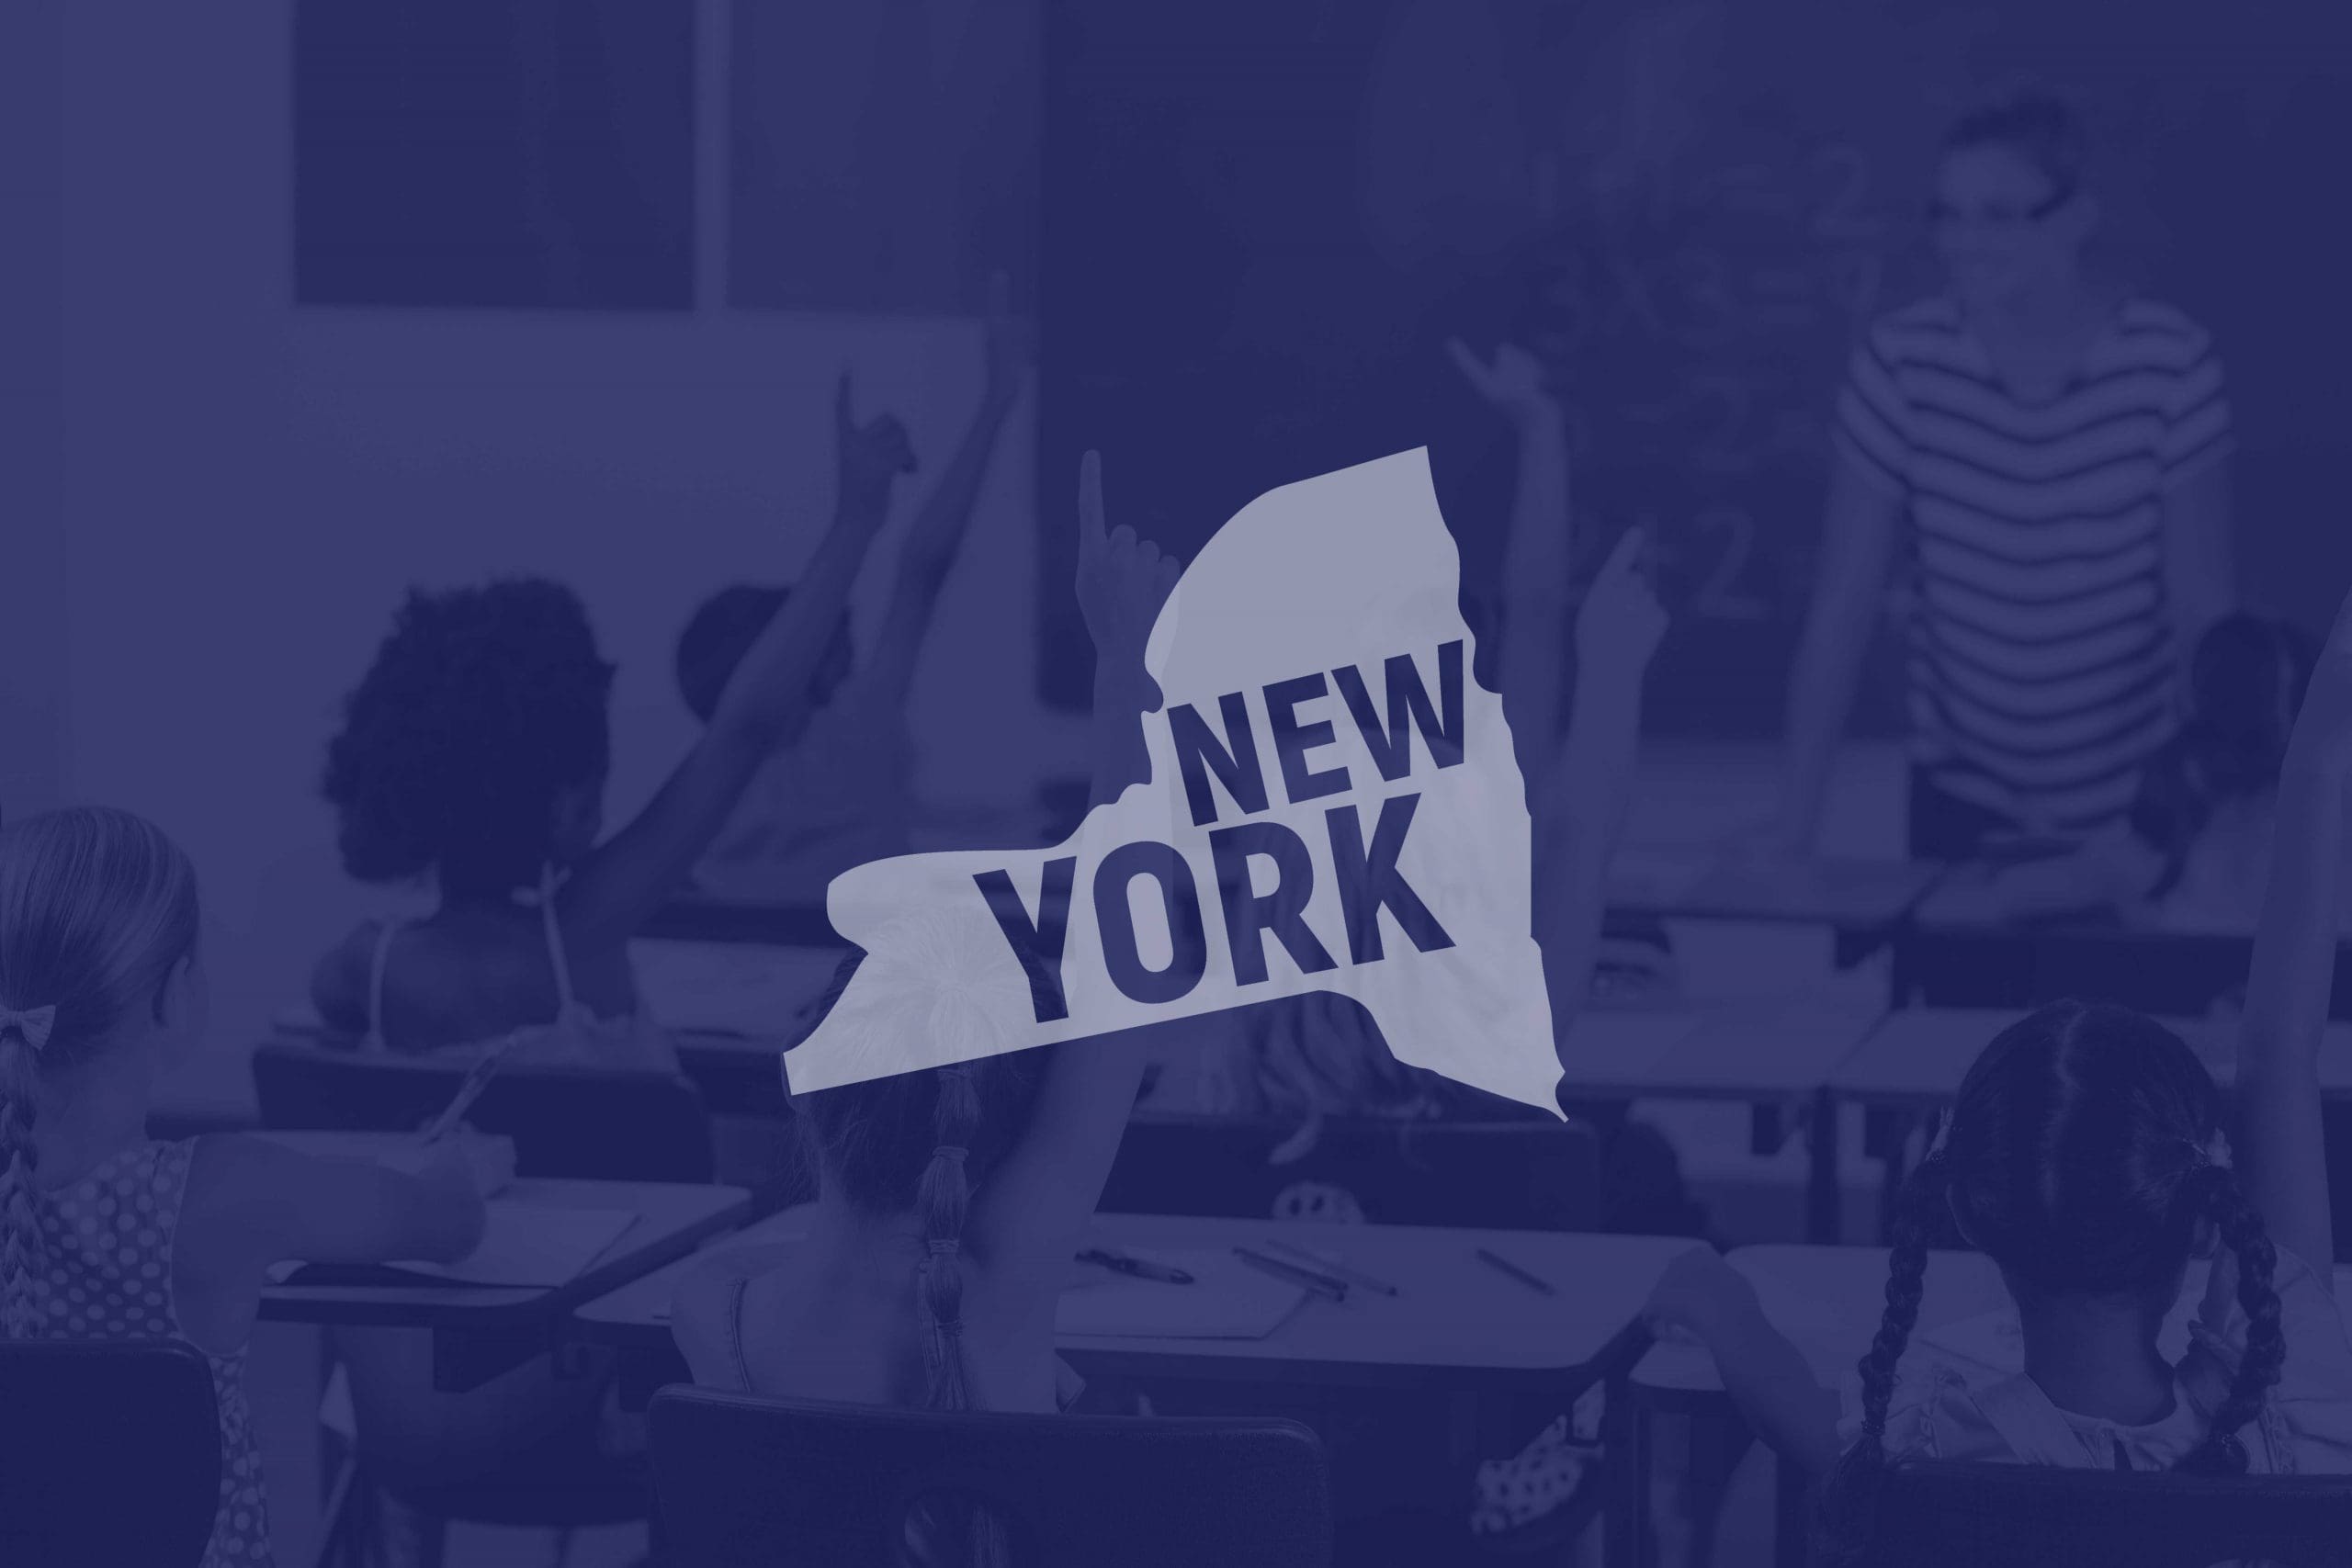 Outline of the state of New York on top of a classroom full of kids raising their hands for their teacher